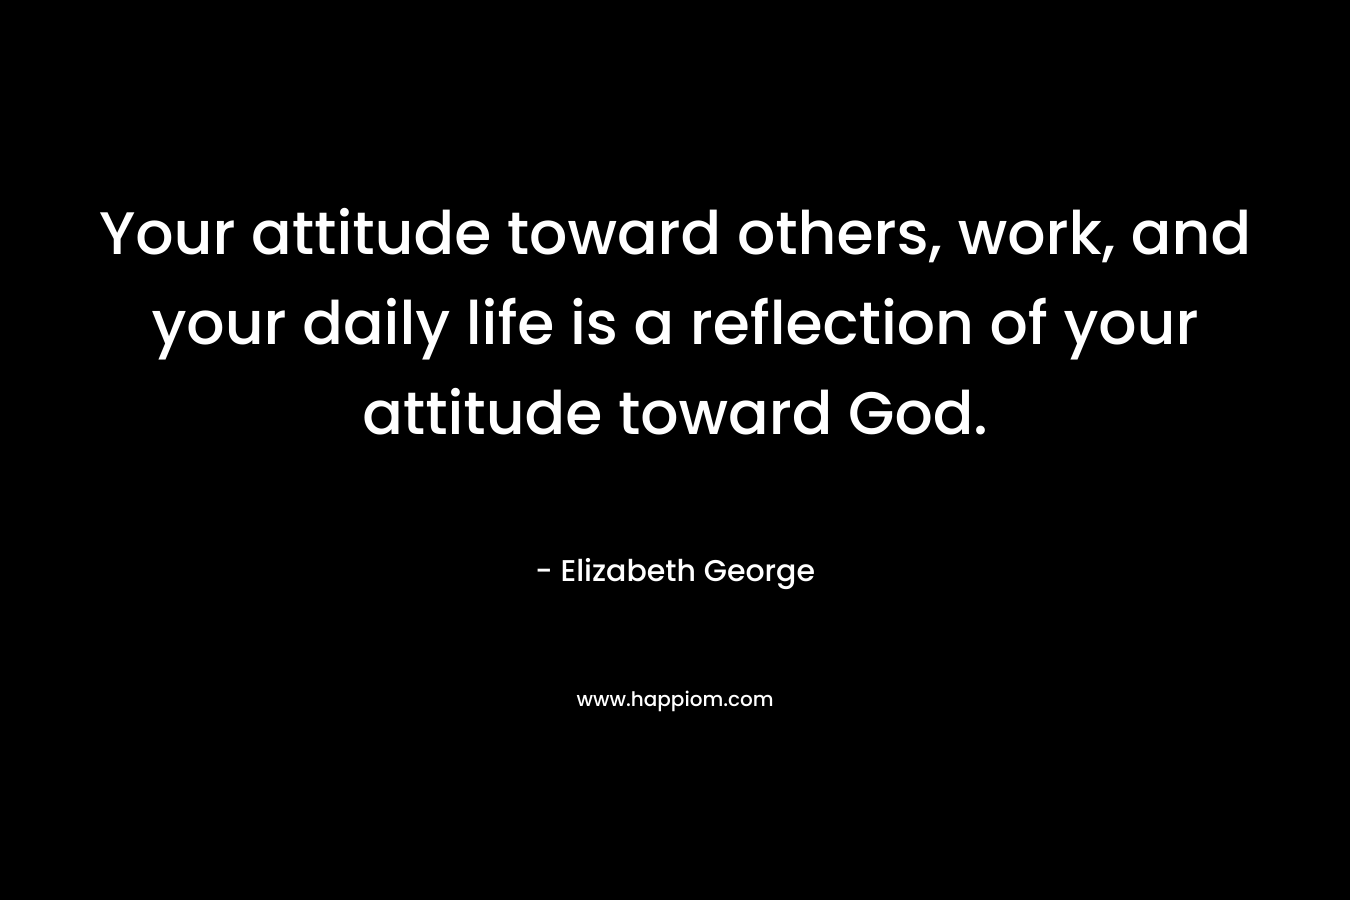 Your attitude toward others, work, and your daily life is a reflection of your attitude toward God.